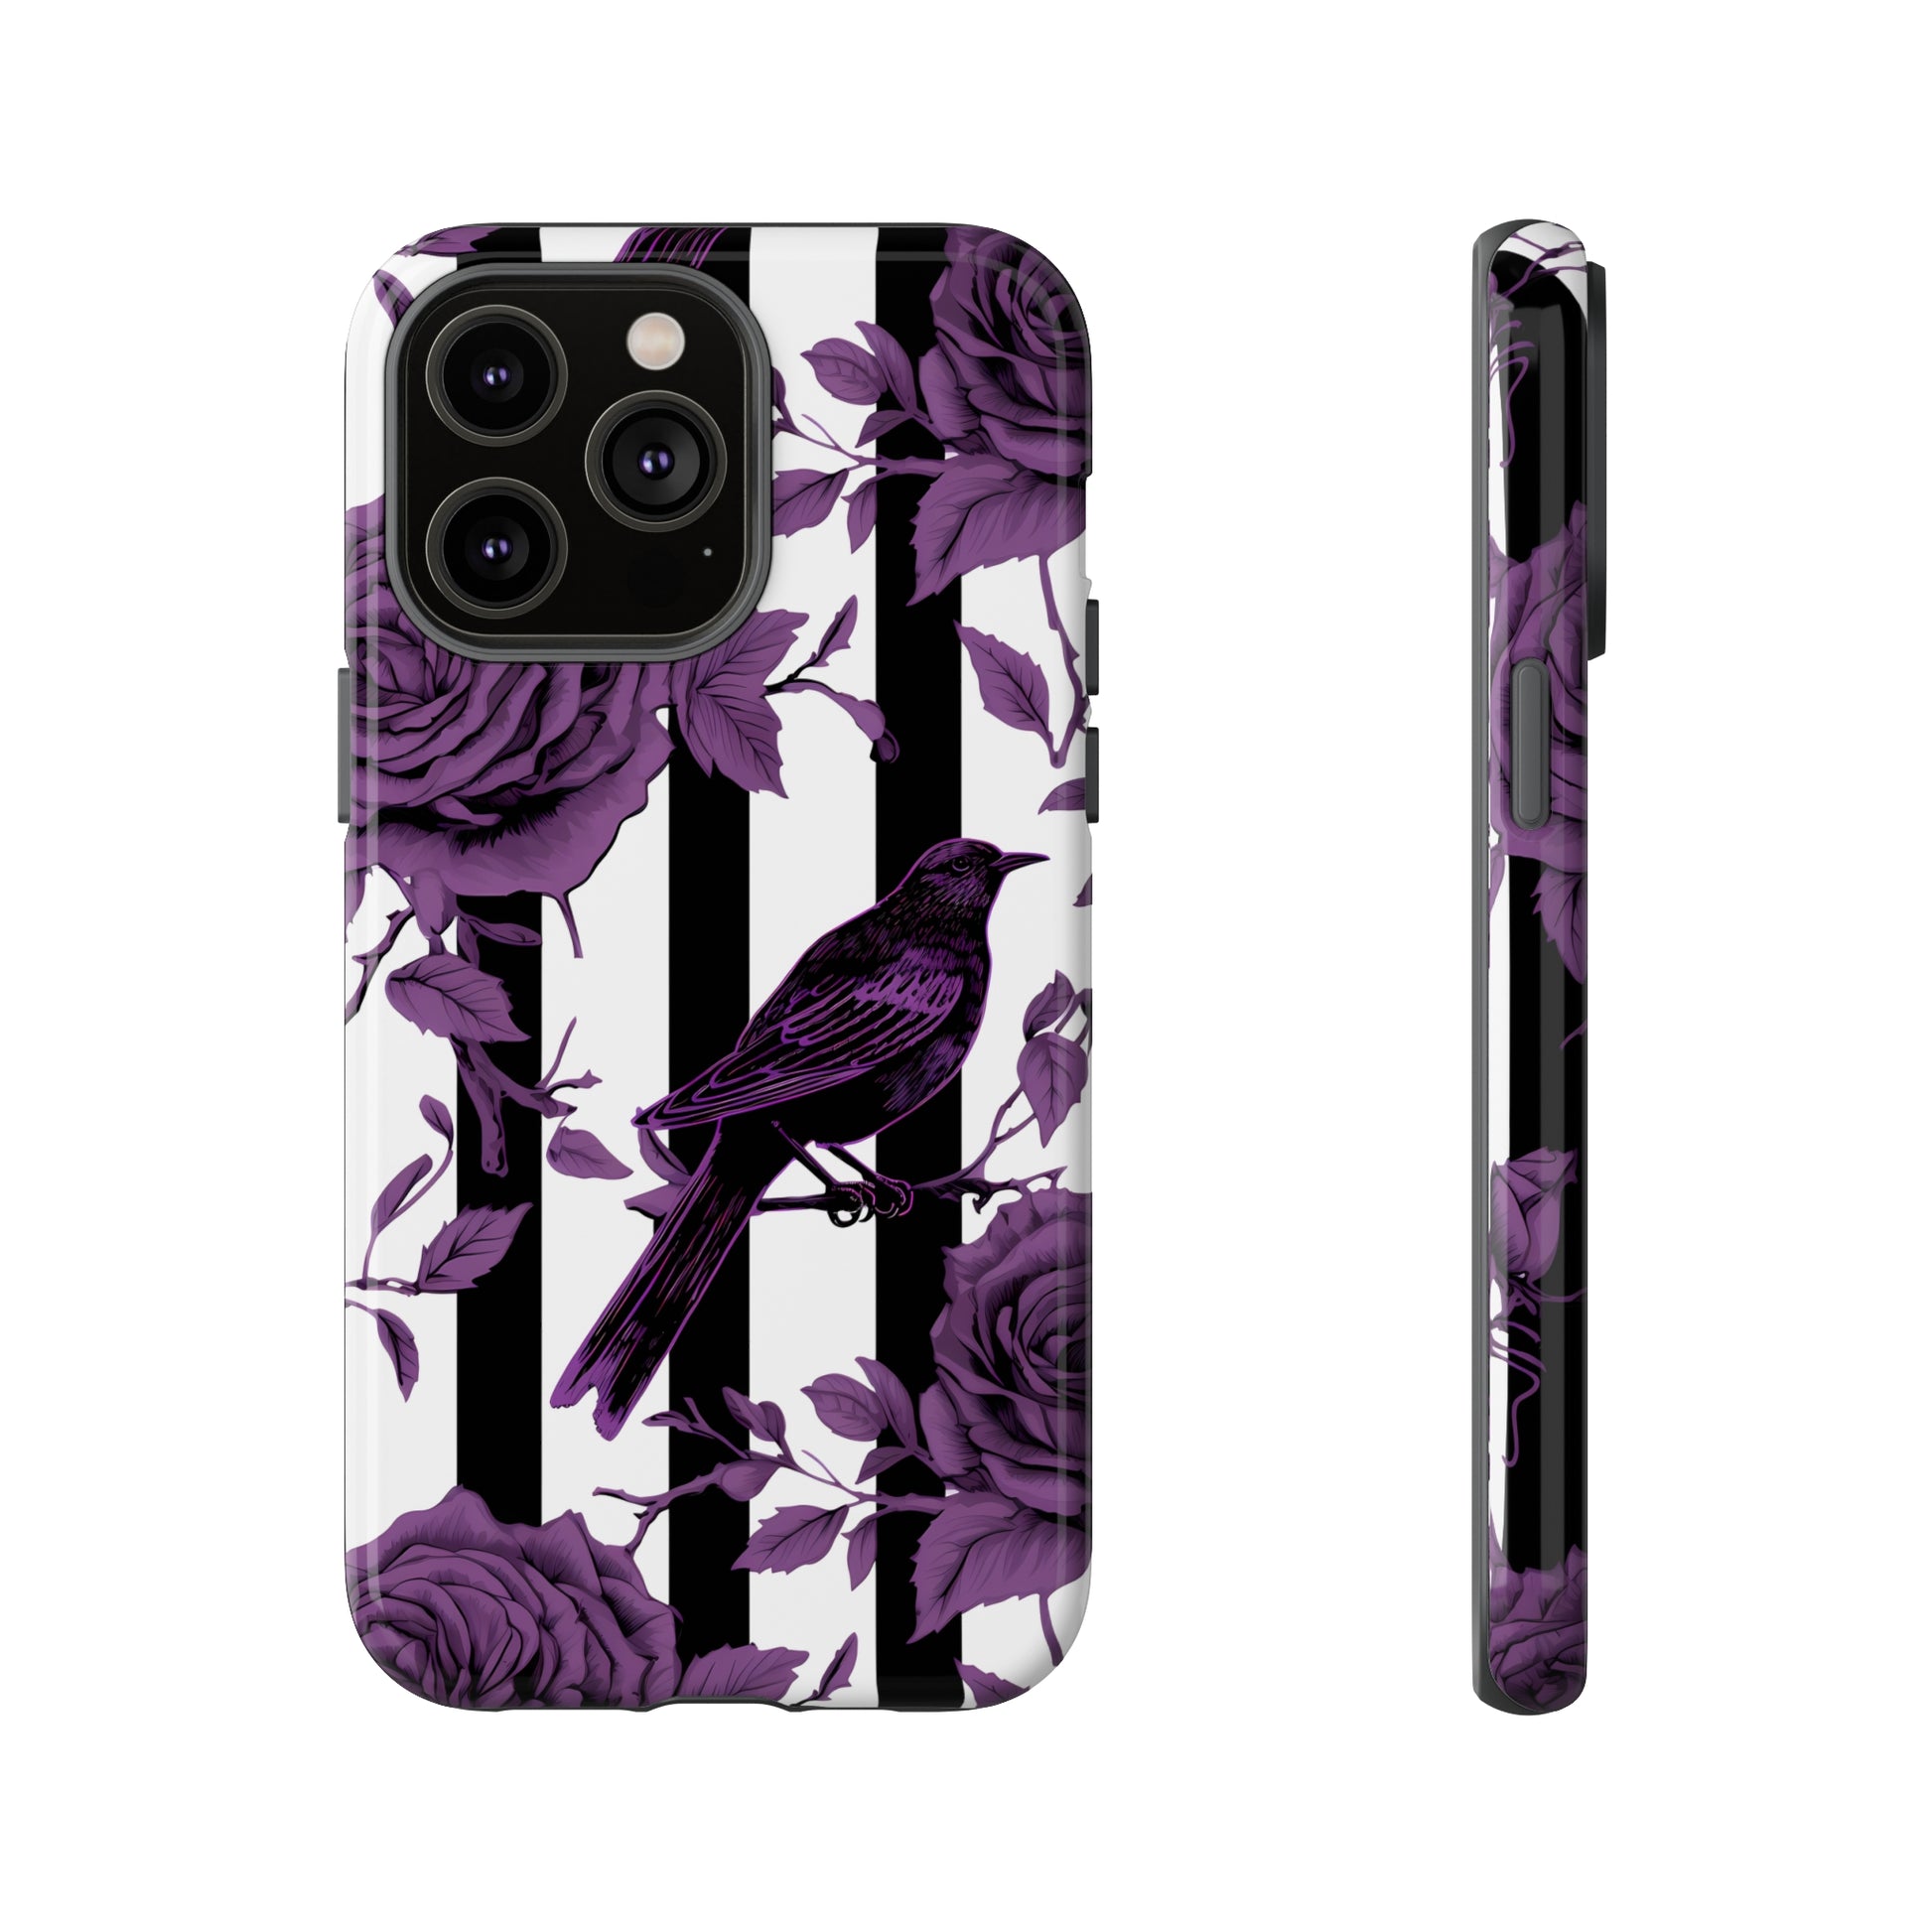 Striped Crows and Roses Tough Cases for iPhone Samsung Google PhonesPhone CaseVTZdesignsiPhone 14 Pro MaxGlossyAccessoriescrowsGlossy